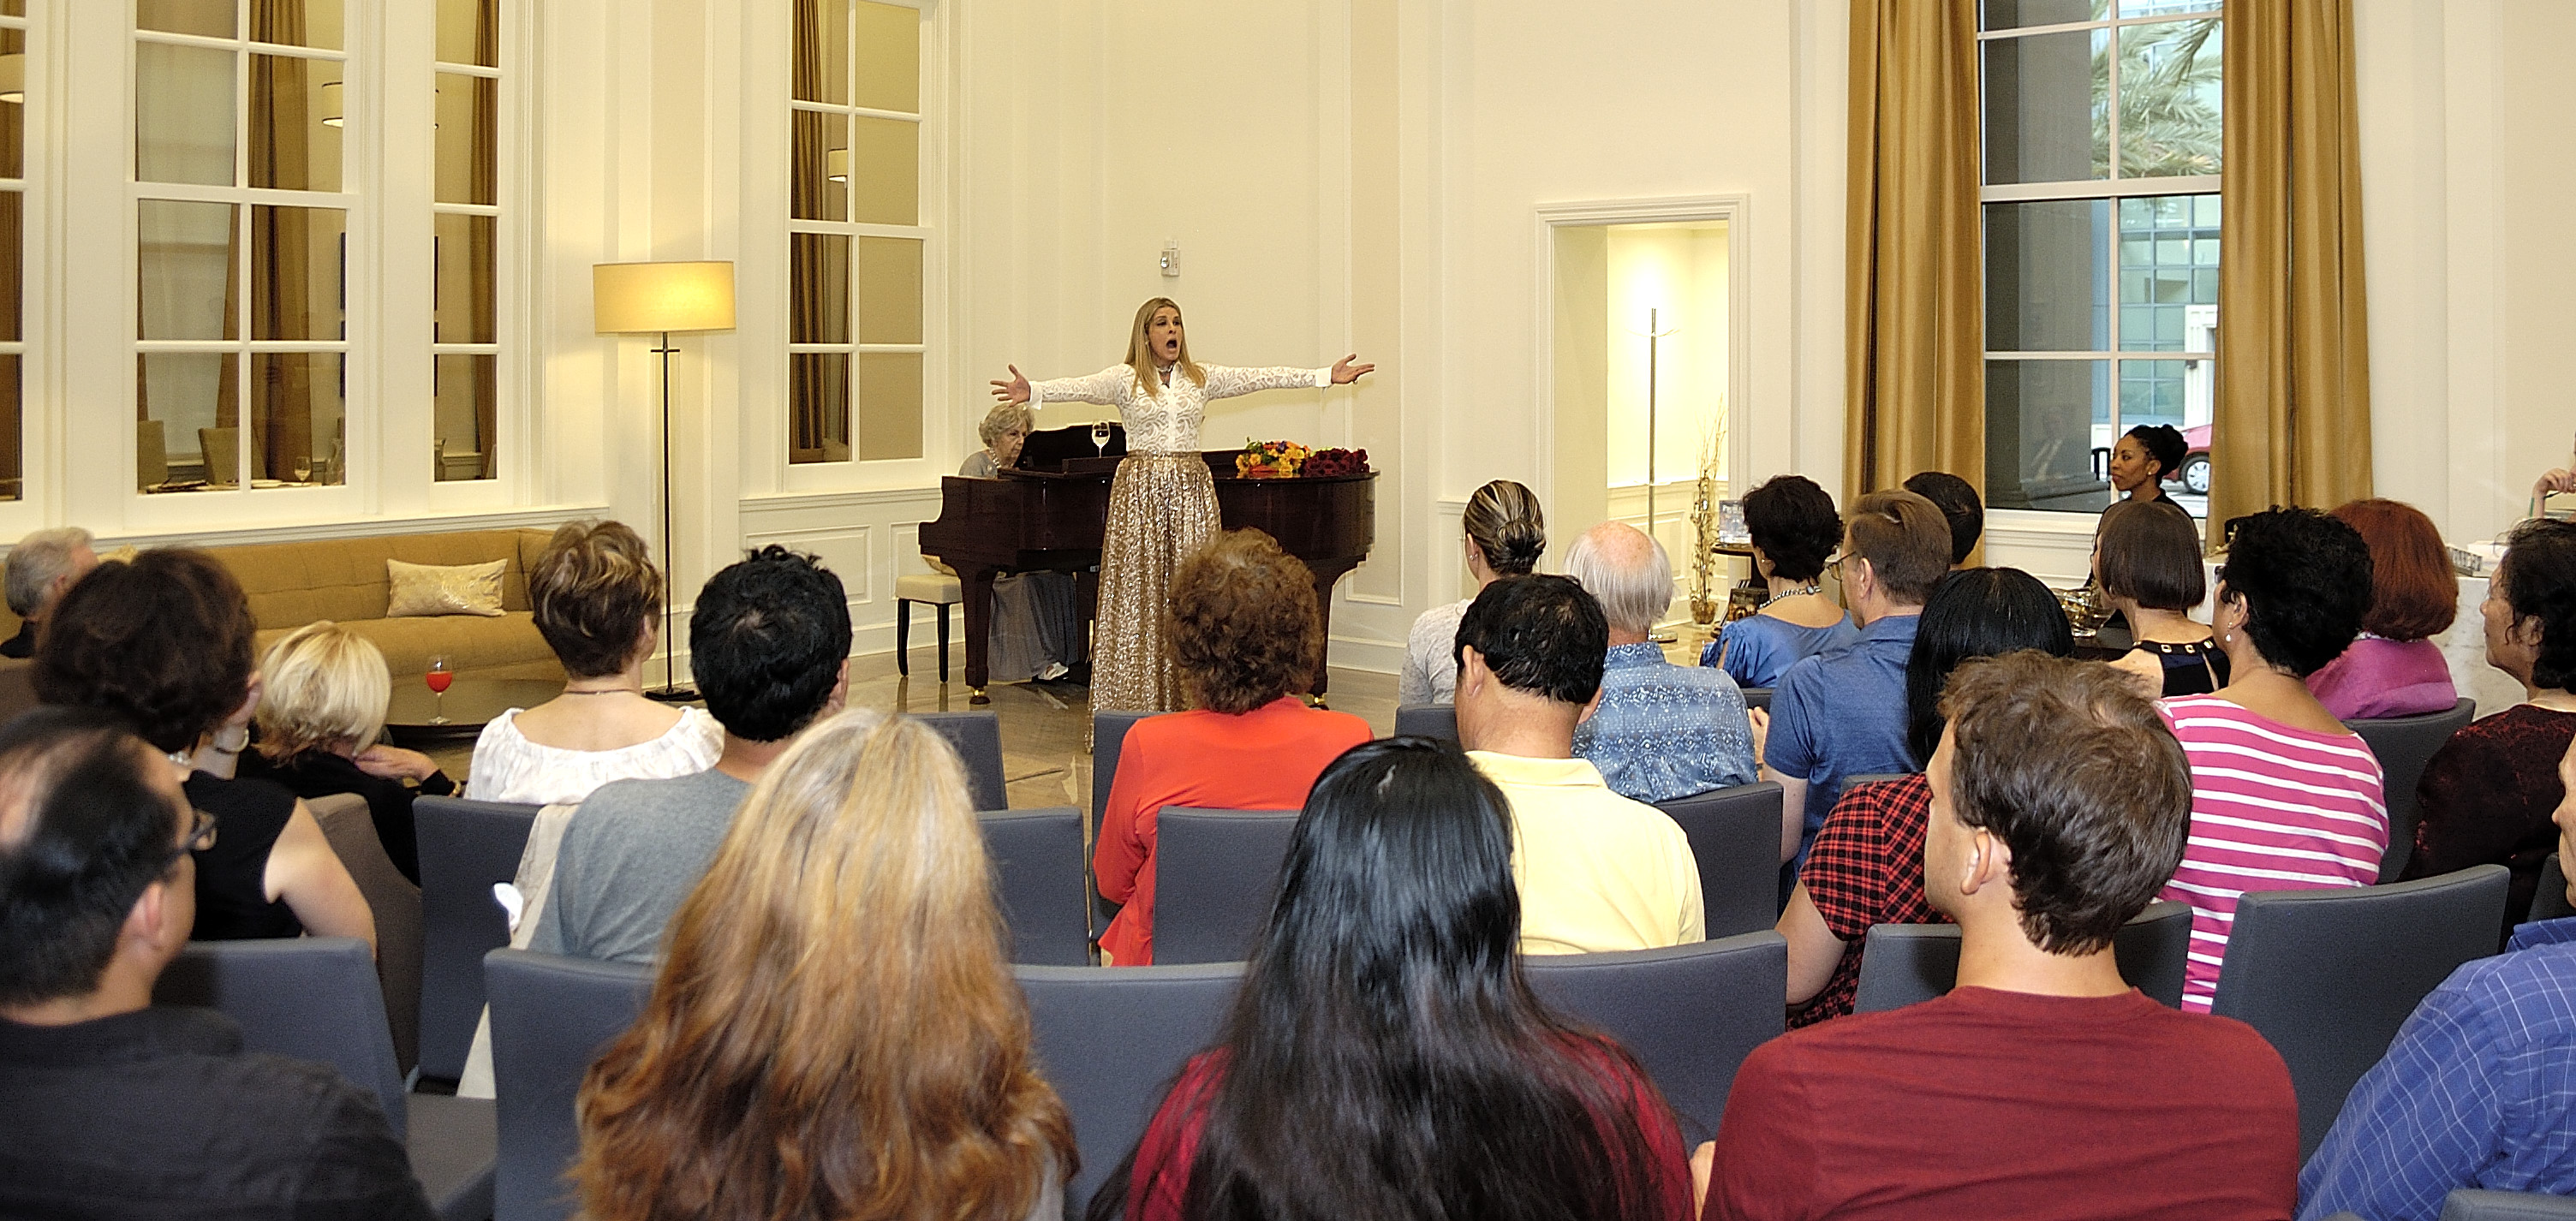 Ms. Susanne Epple performing  a selection of popular opera art songs and arias at the Scientology Information Center on August 27th..JPG